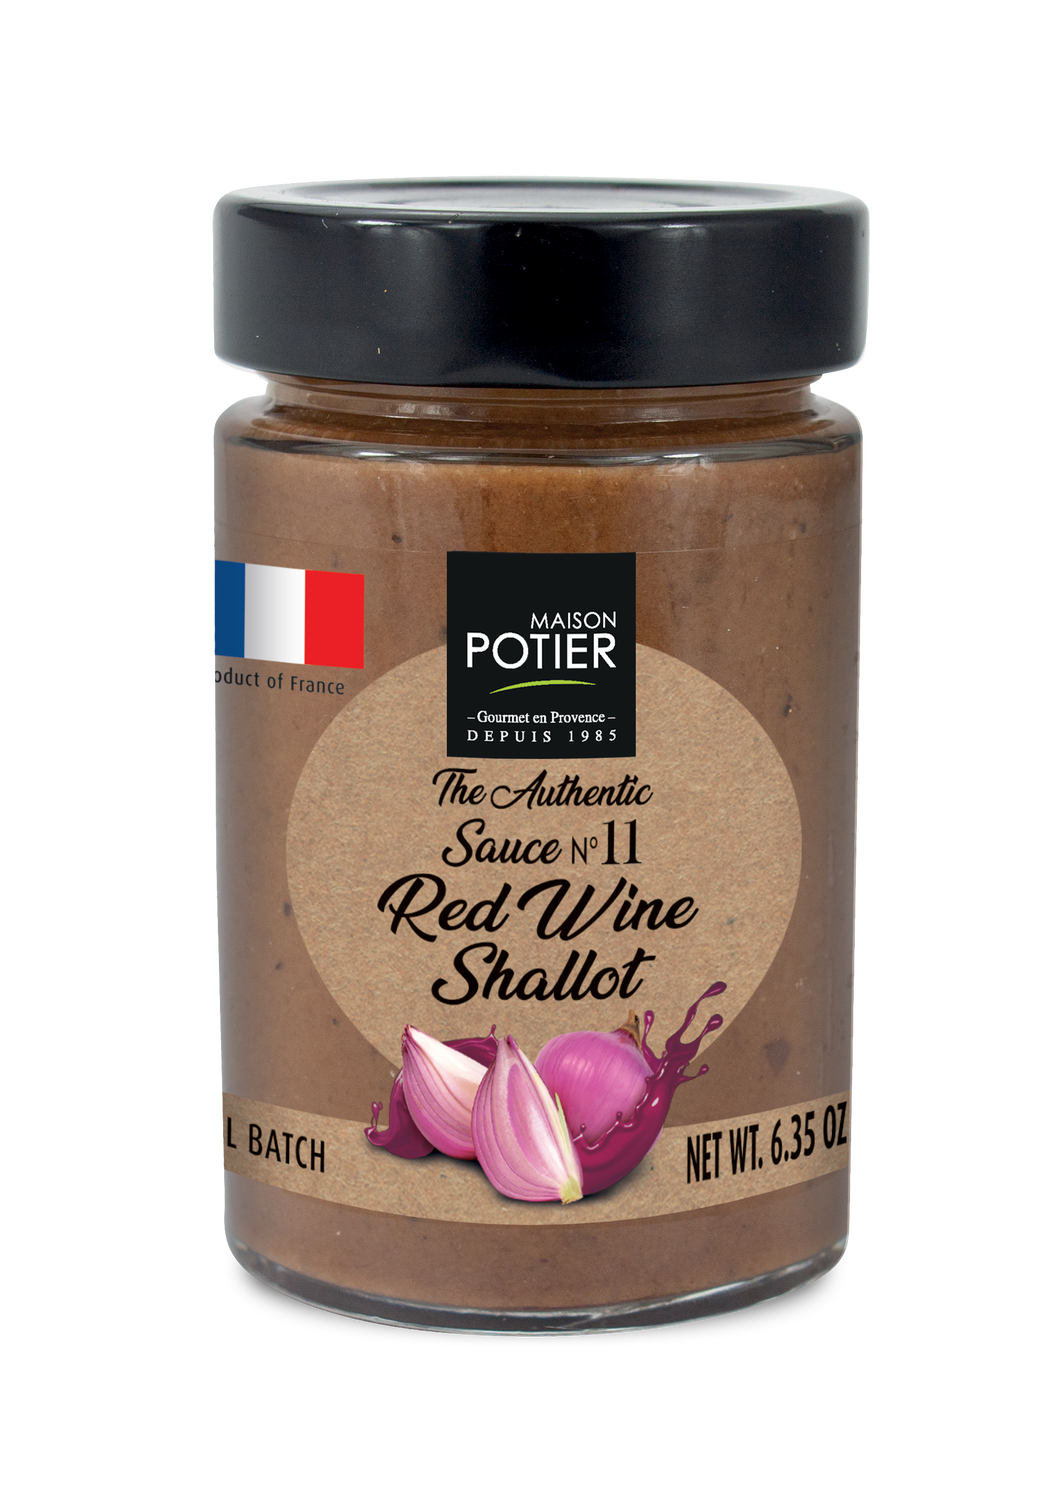 Maison Potier Red Wine and Shallot Sauce, The Authentic Sauce N